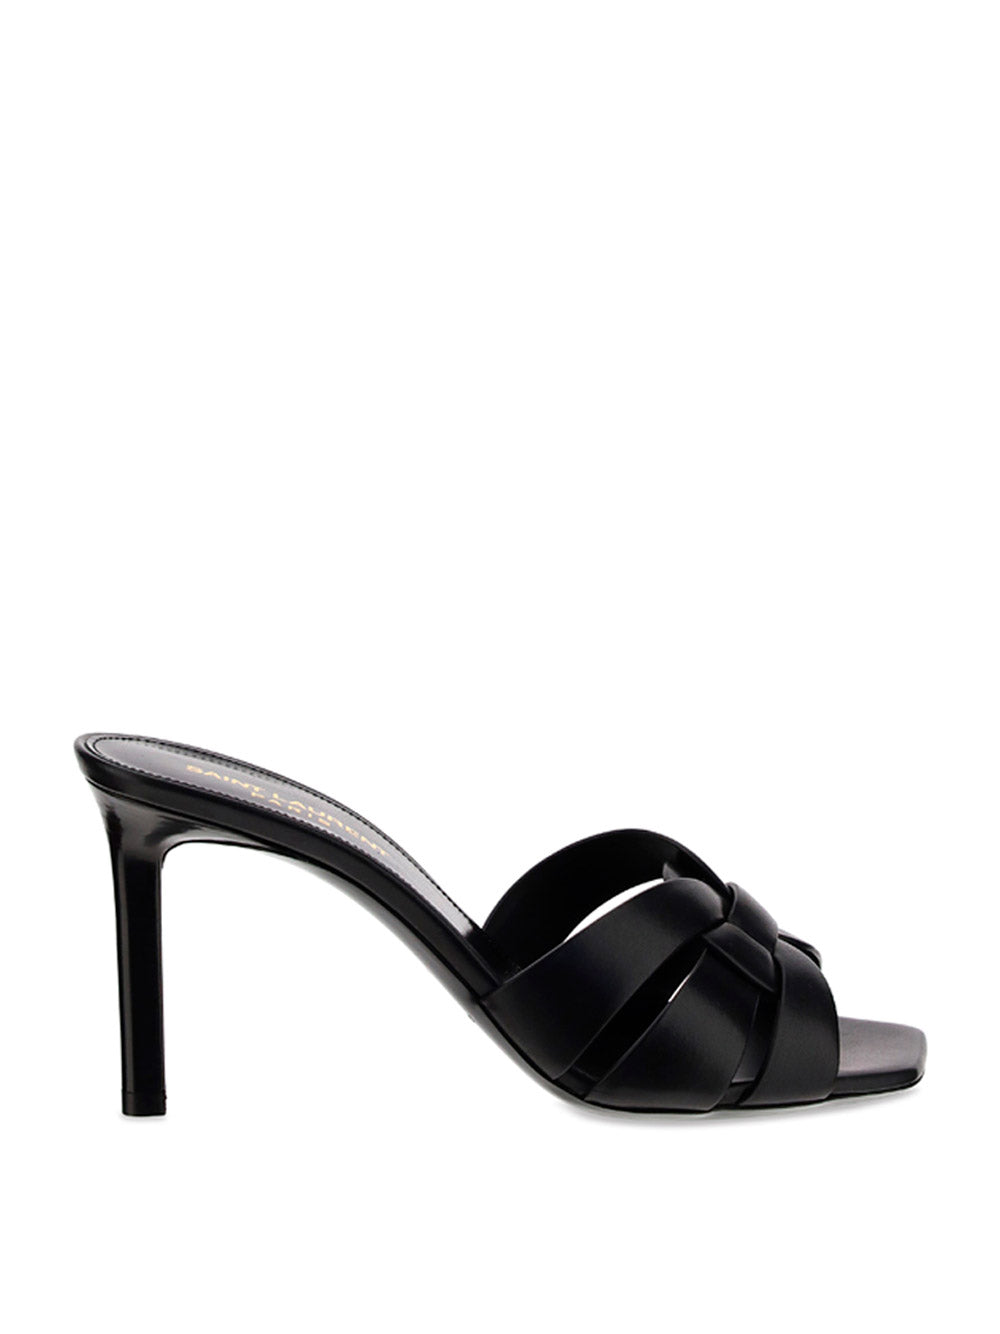 Tribute Heeled Mules In Smooth Leather - Black